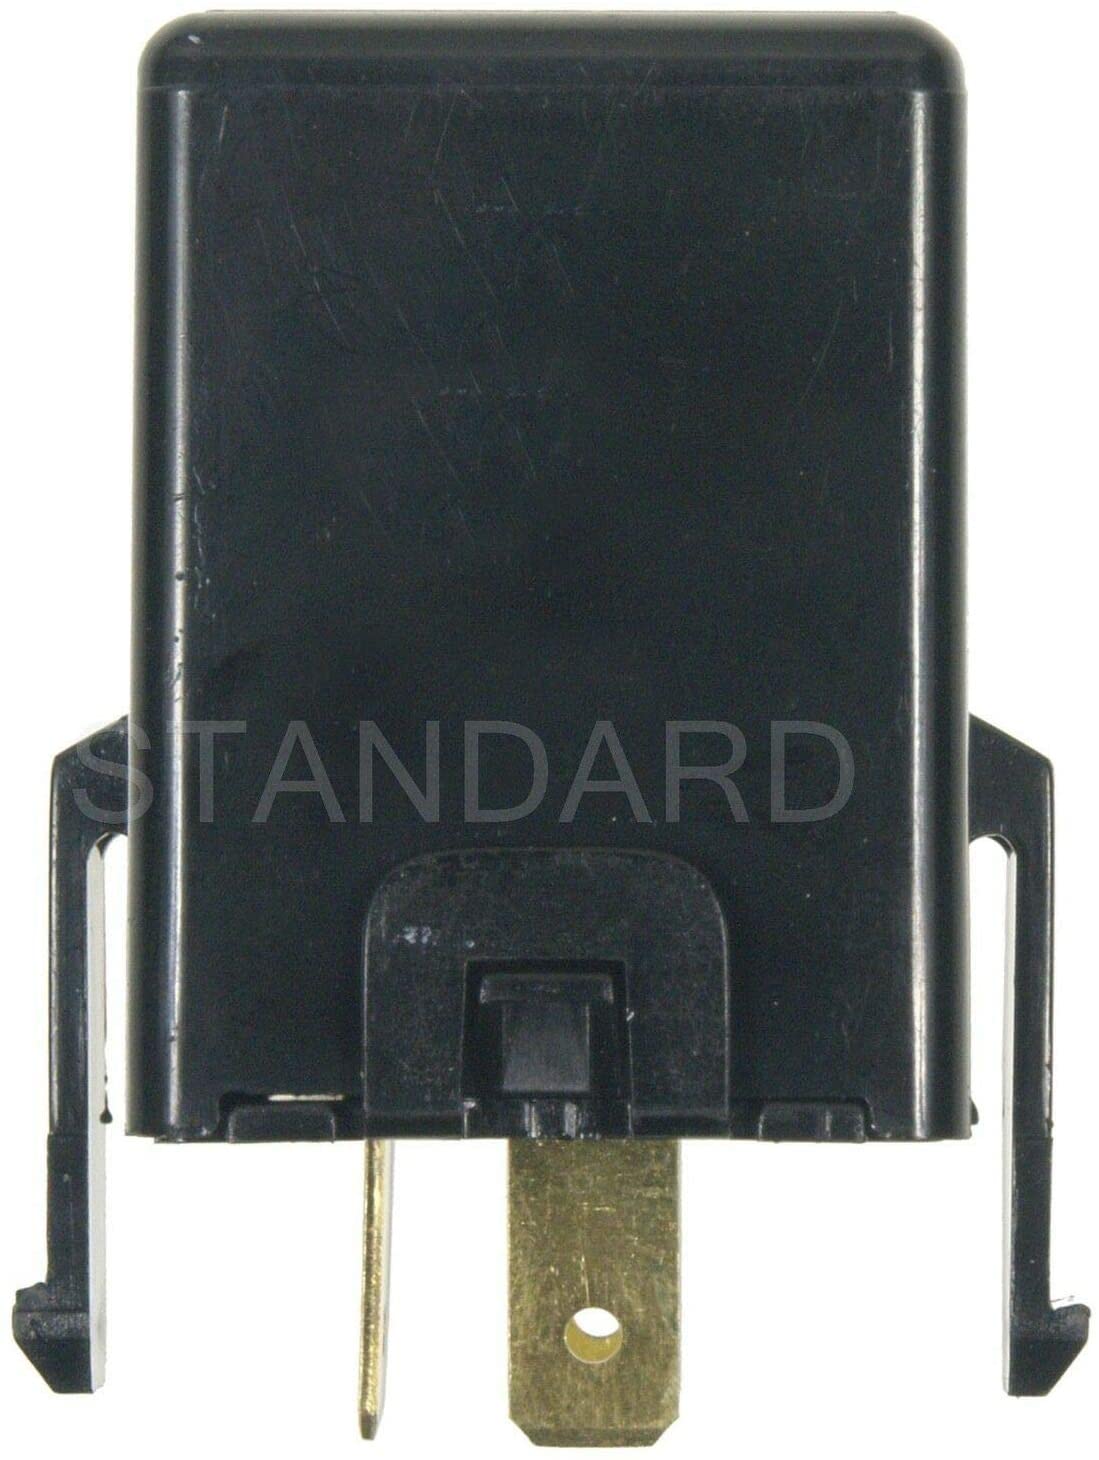 Standard Motor Products RY-751 Relay